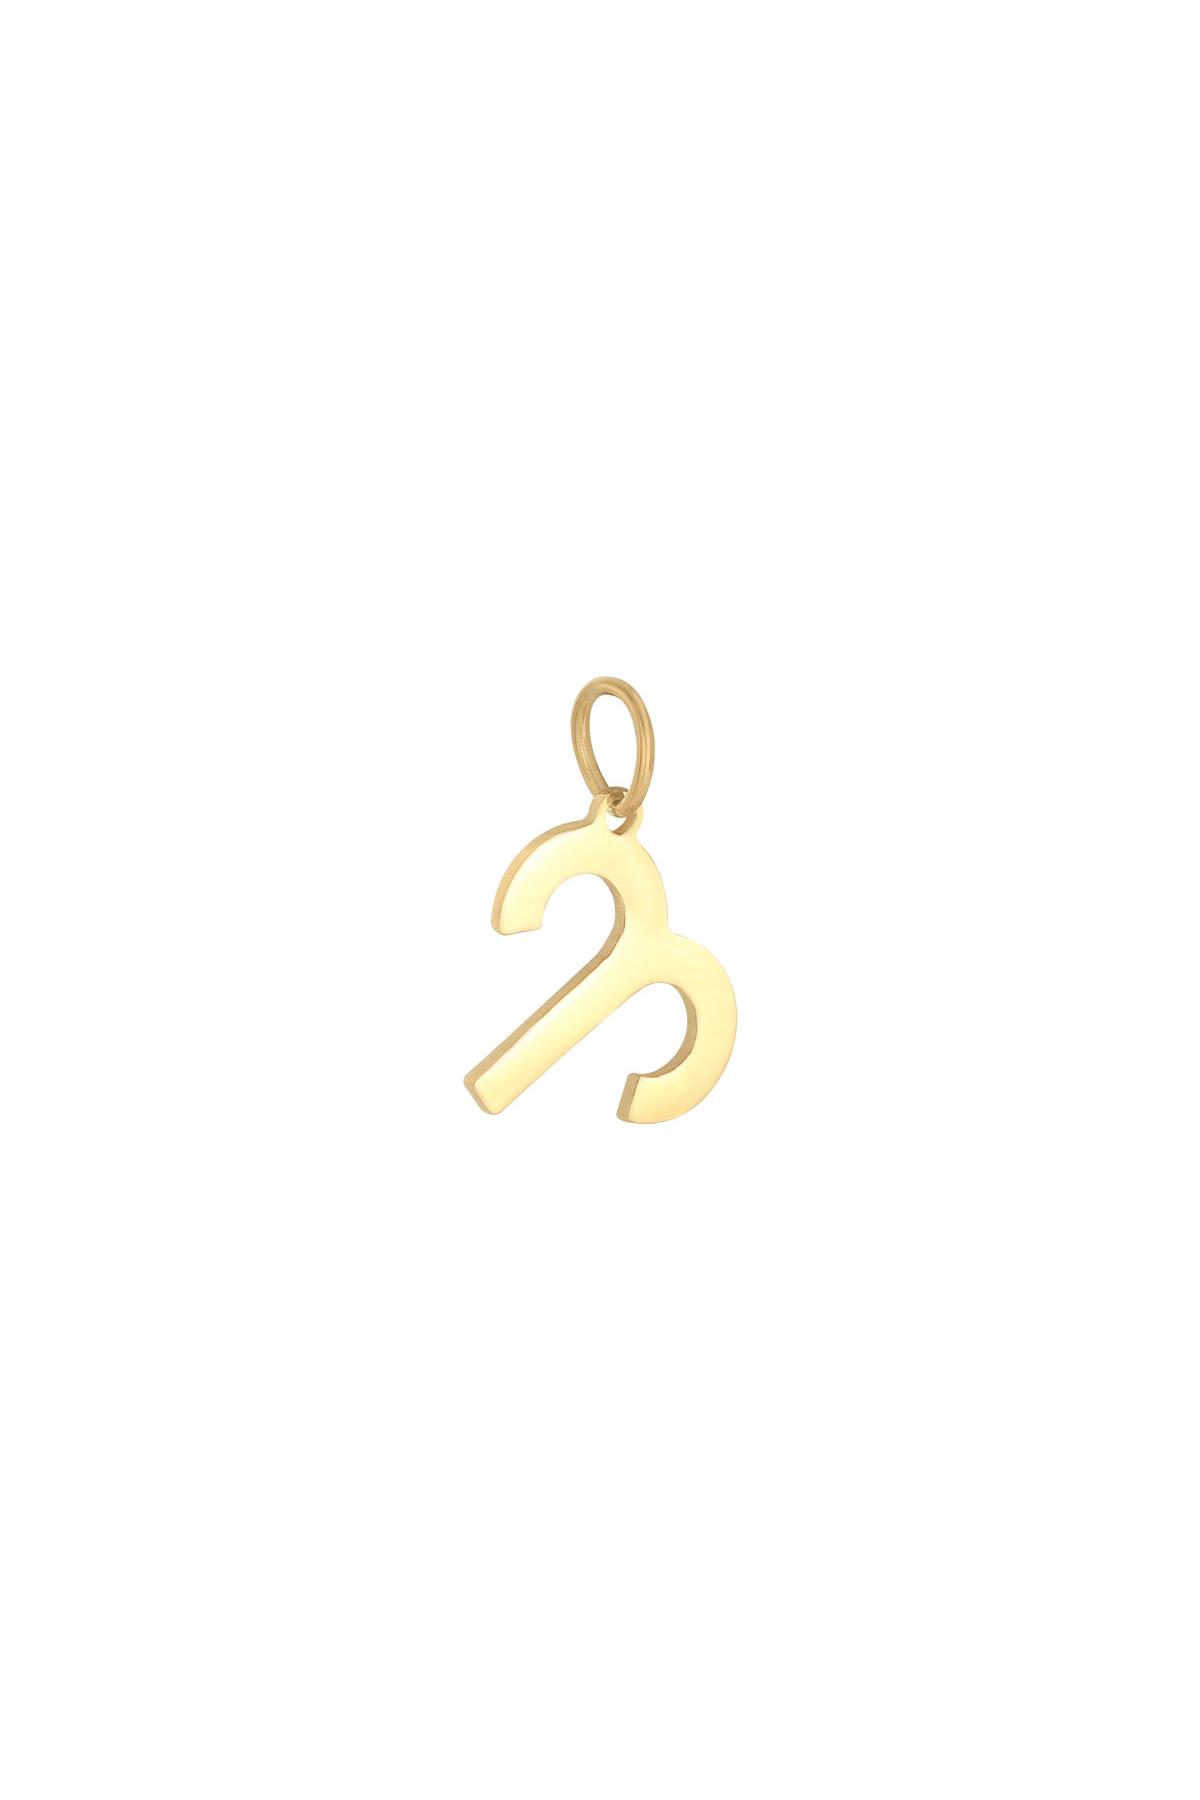 Gold / Charm Zodiac Aries Gold Stainless Steel Picture24